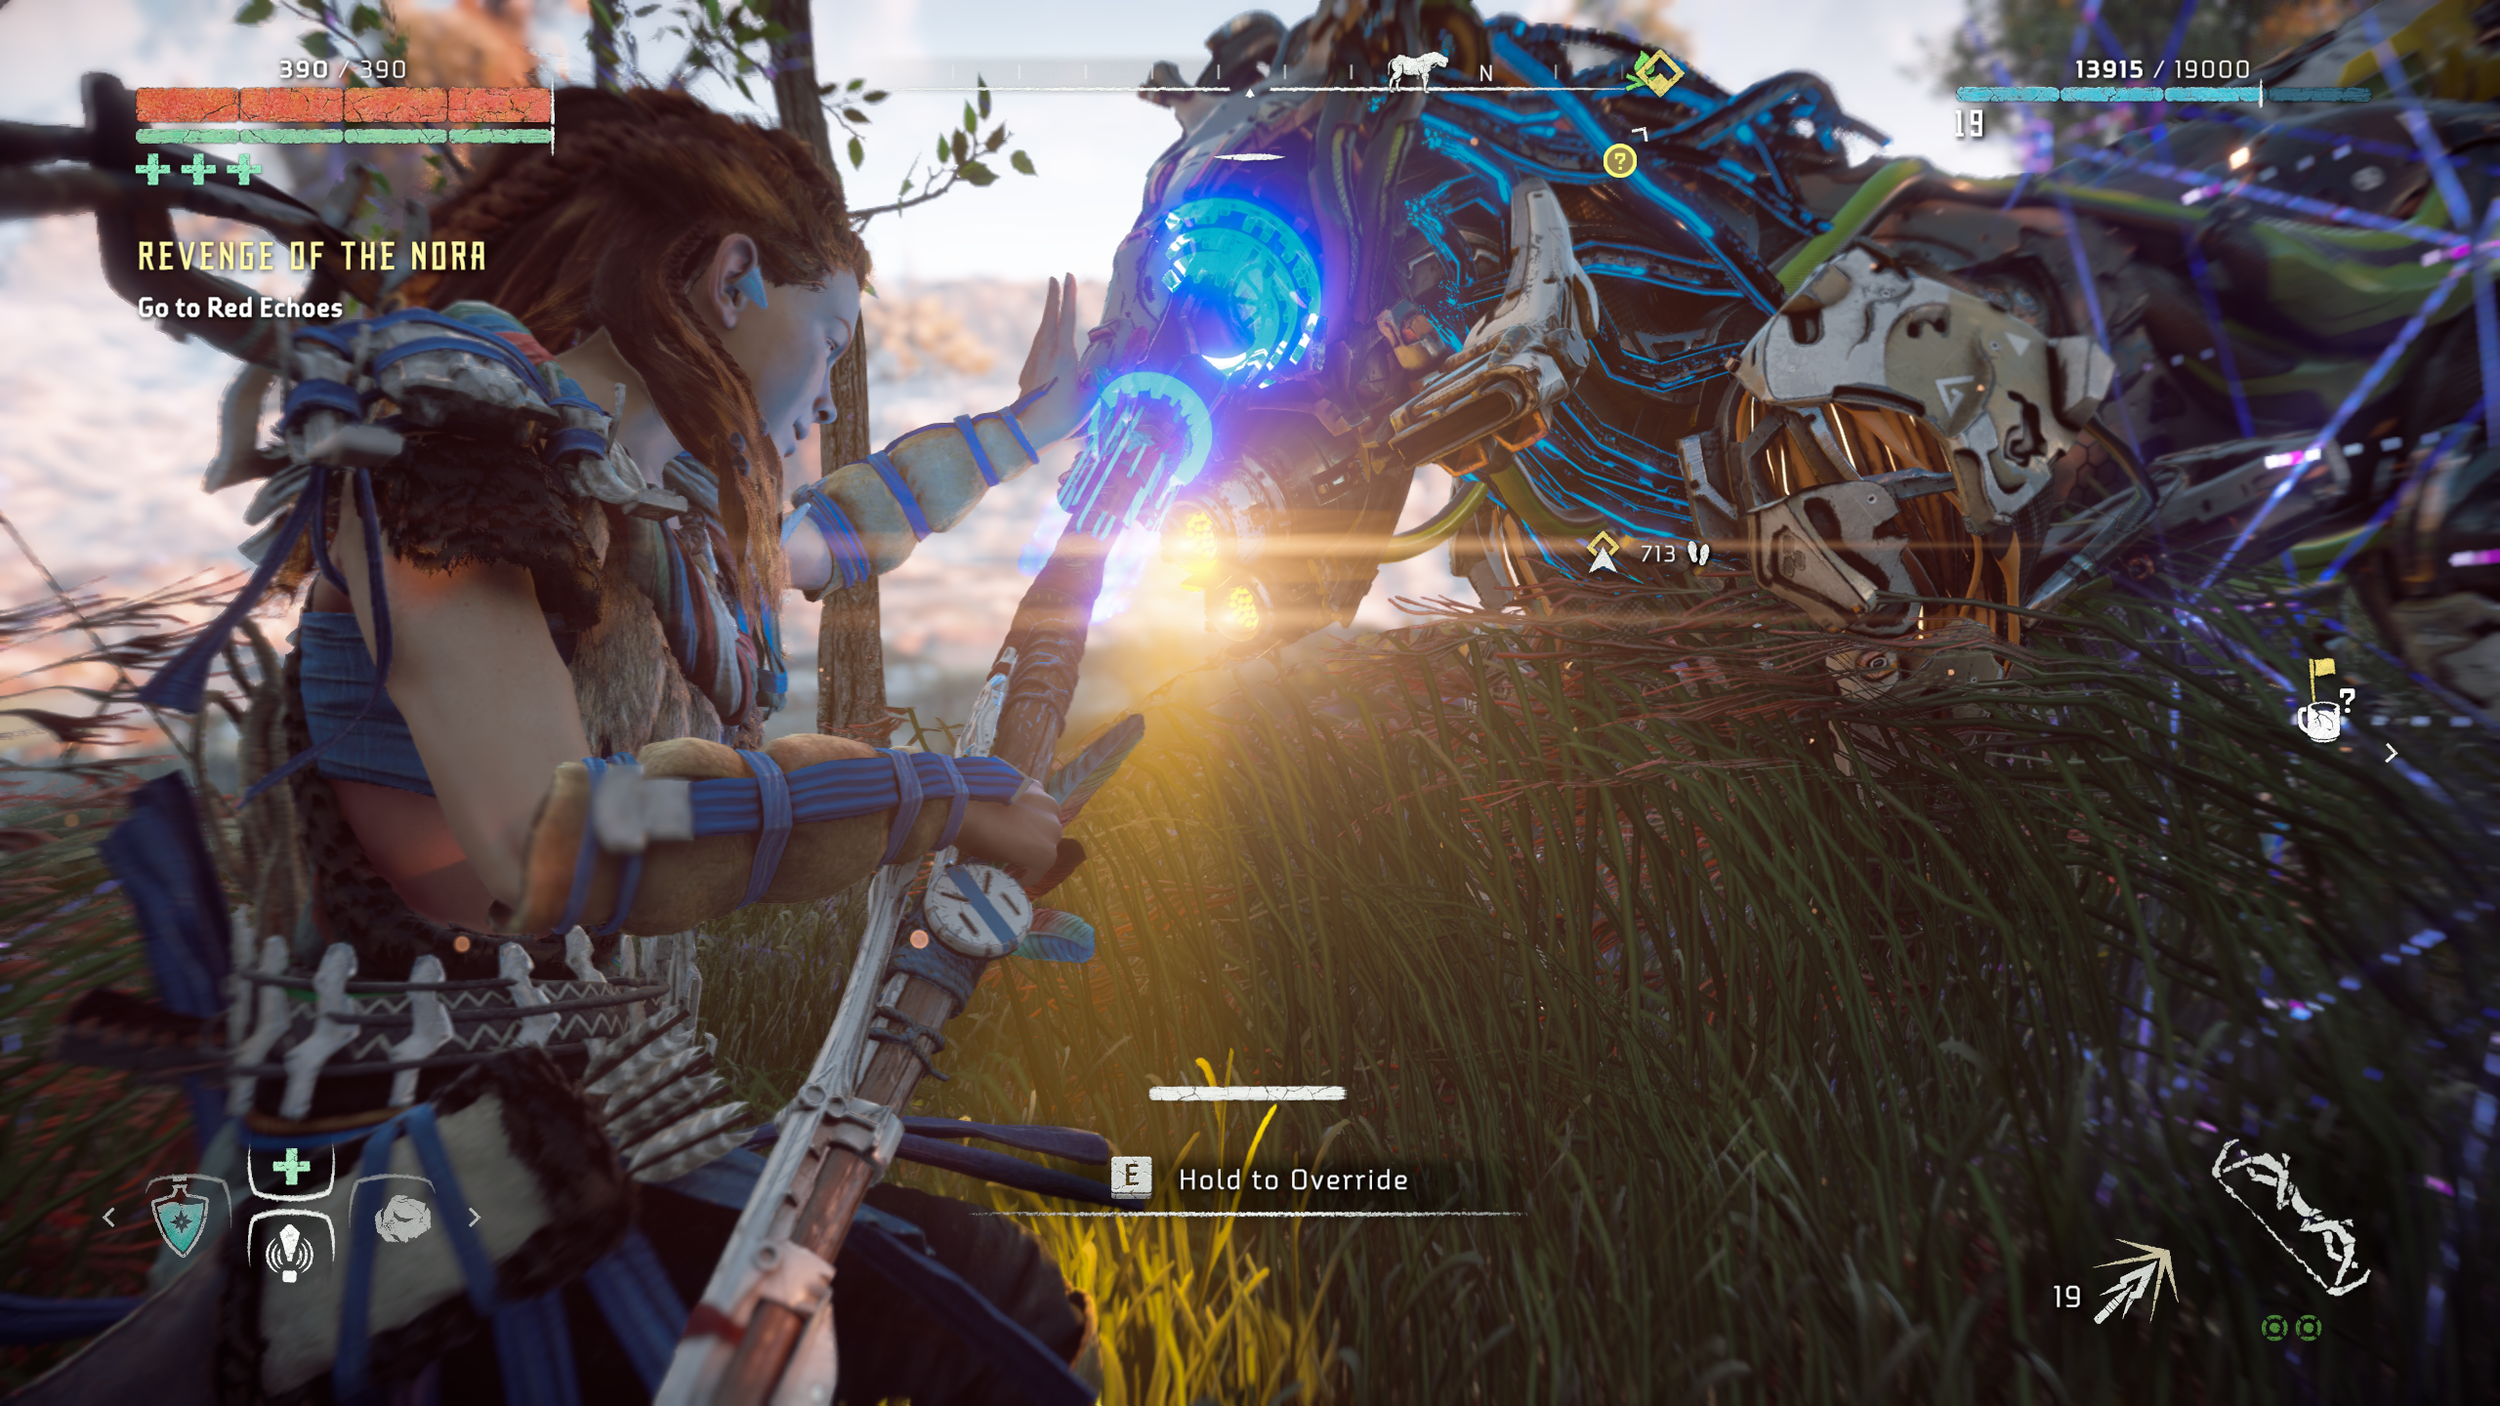 Horizon Zero Dawn: 10 Weapons & Add-Ons That Make The Game Way Too